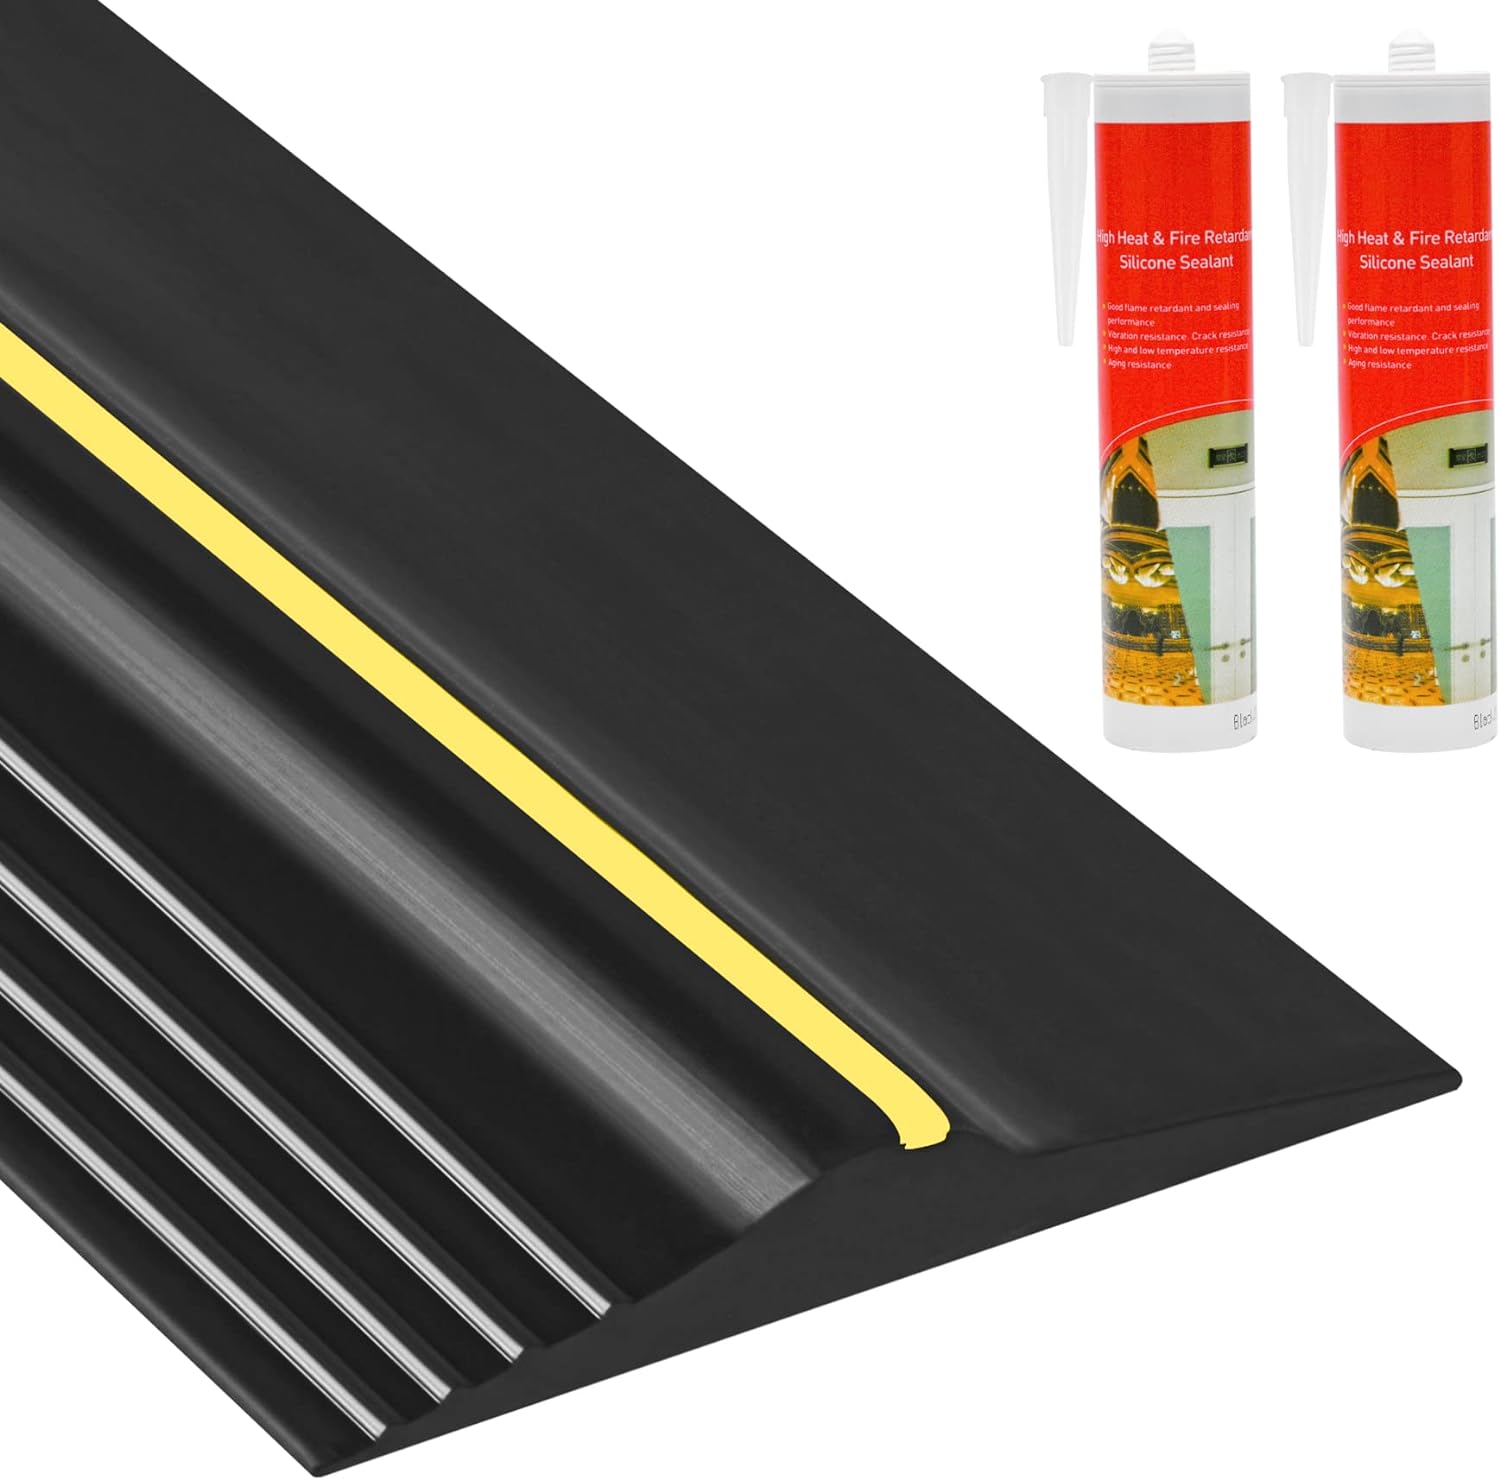 Papillon 16Ft with Adhesives Universal Garage Door Bottom Threshold Seal Strip, Weatherproof Rubber DIY Weather Stripping Replacement -